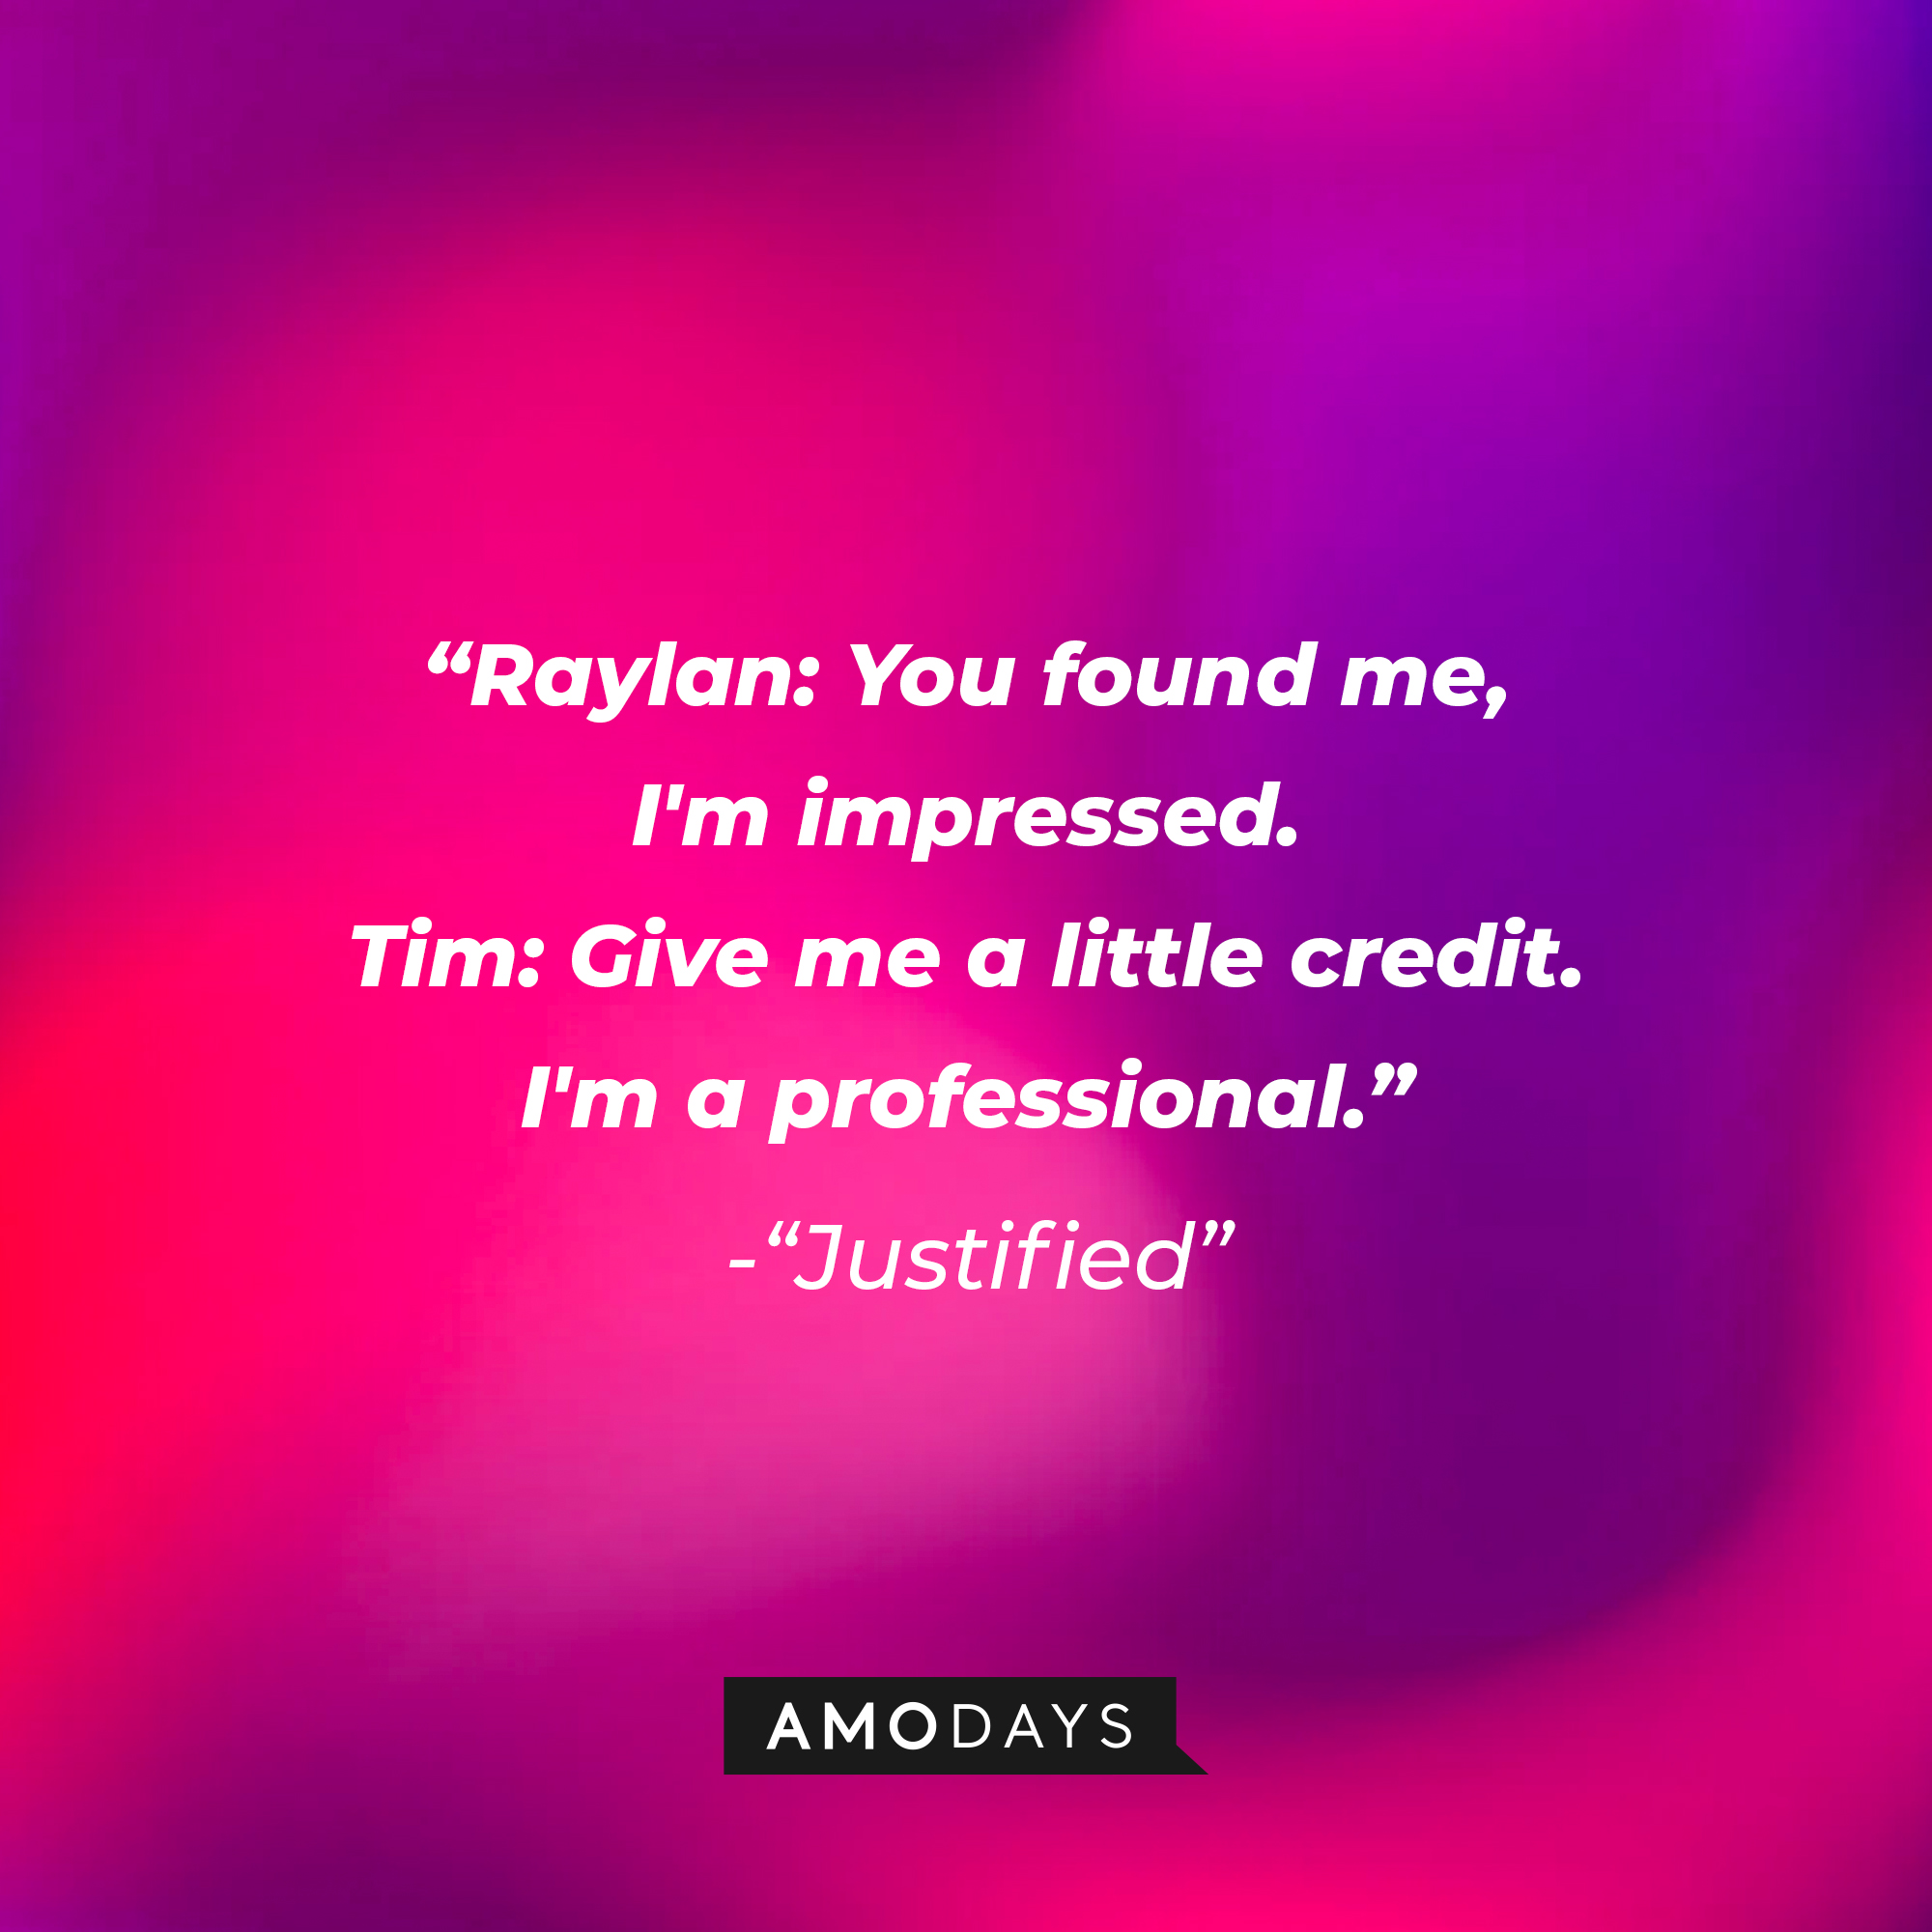 Quote from “Justified”: “Raylan: You found me, I'm impressed. Tim: Give me a little credit. I'm a professional.” | Source: AmoDays